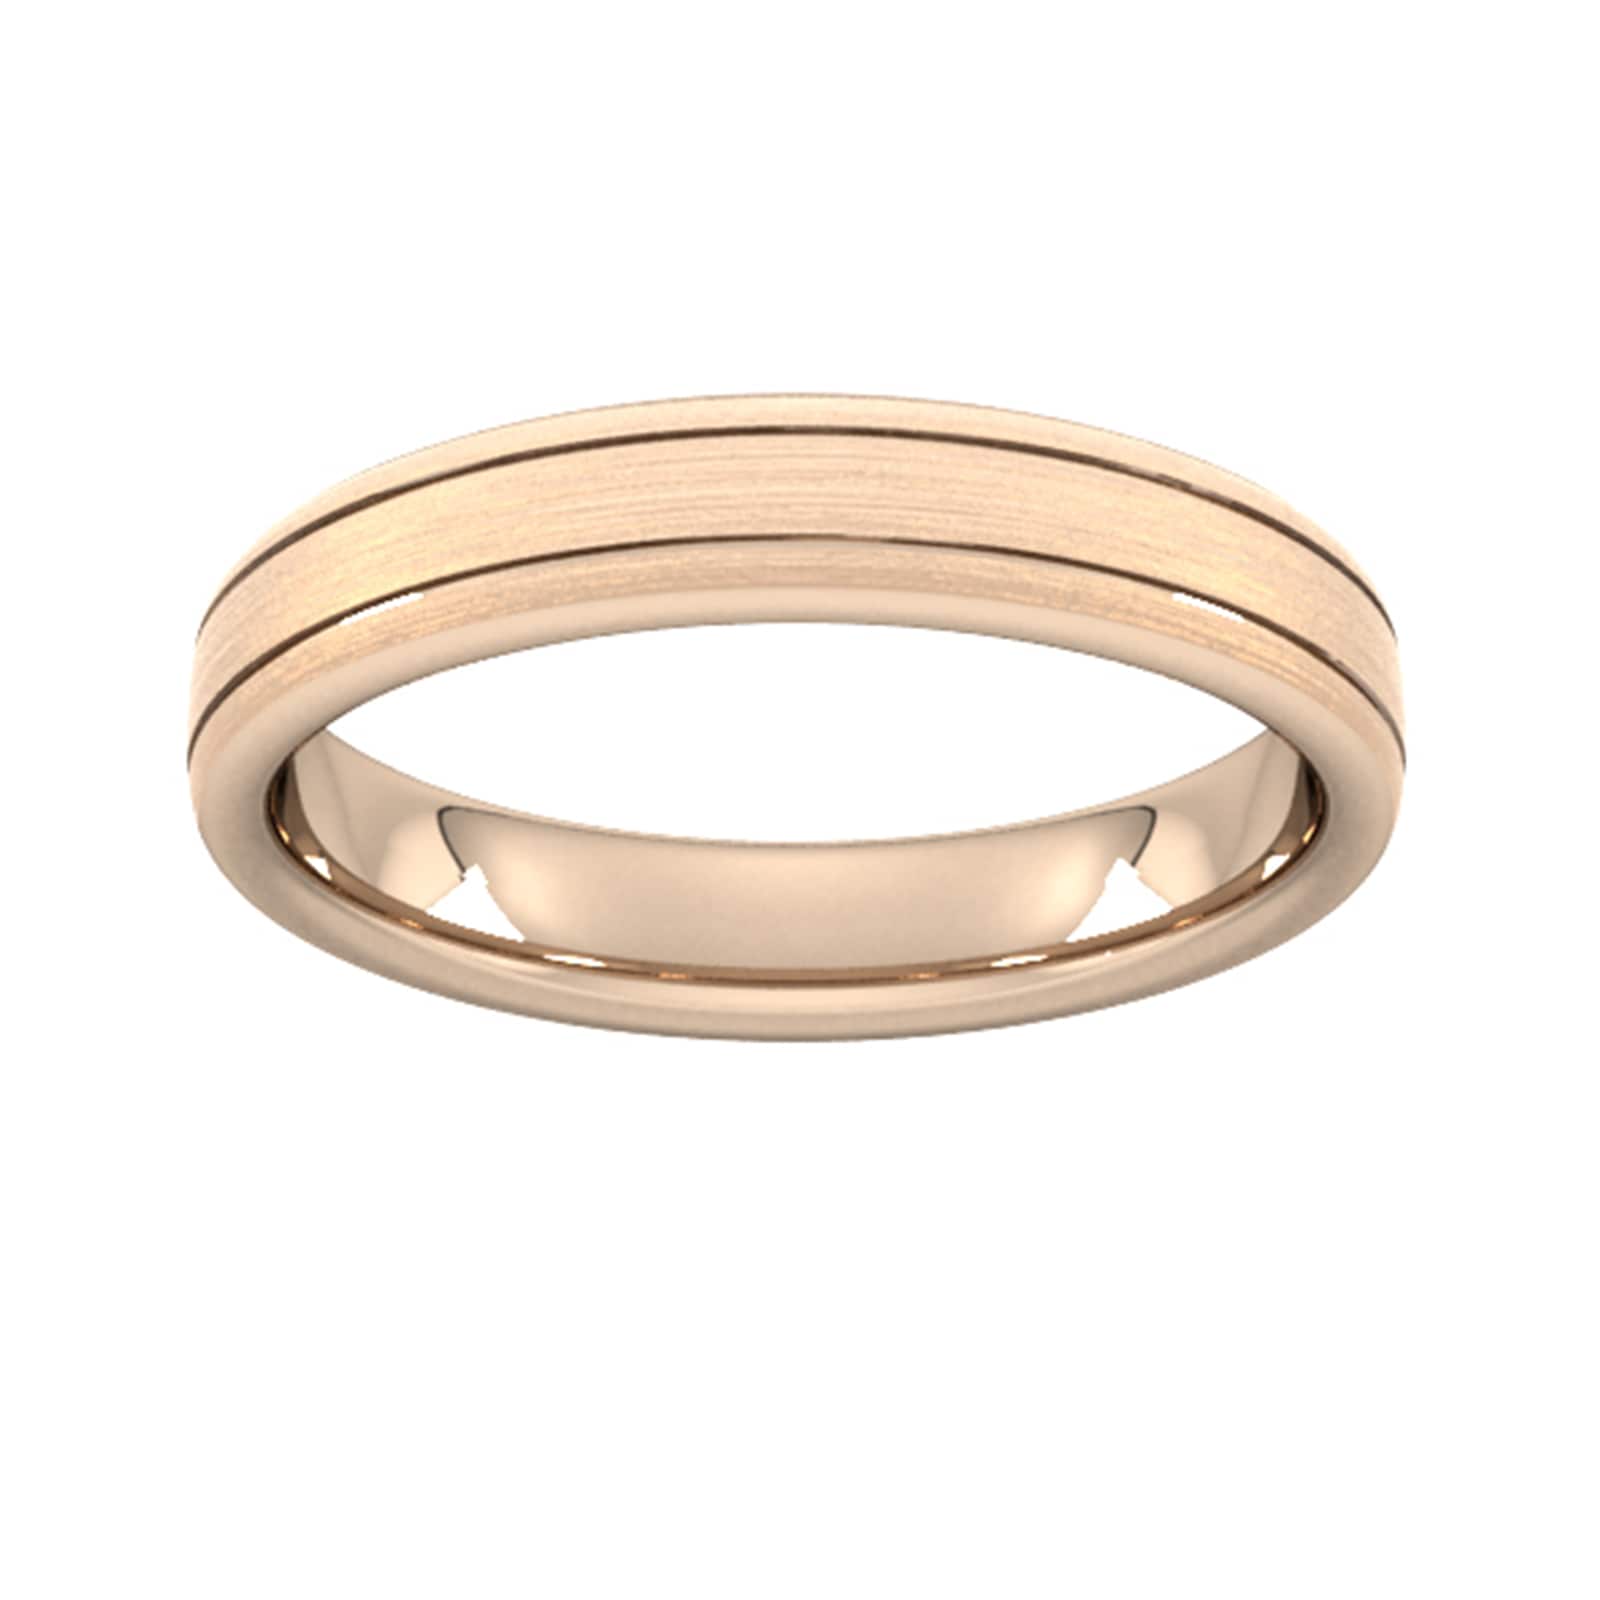 4mm Traditional Court Standard Matt Finish With Double Grooves Wedding Ring In 9 Carat Rose Gold - Ring Size J